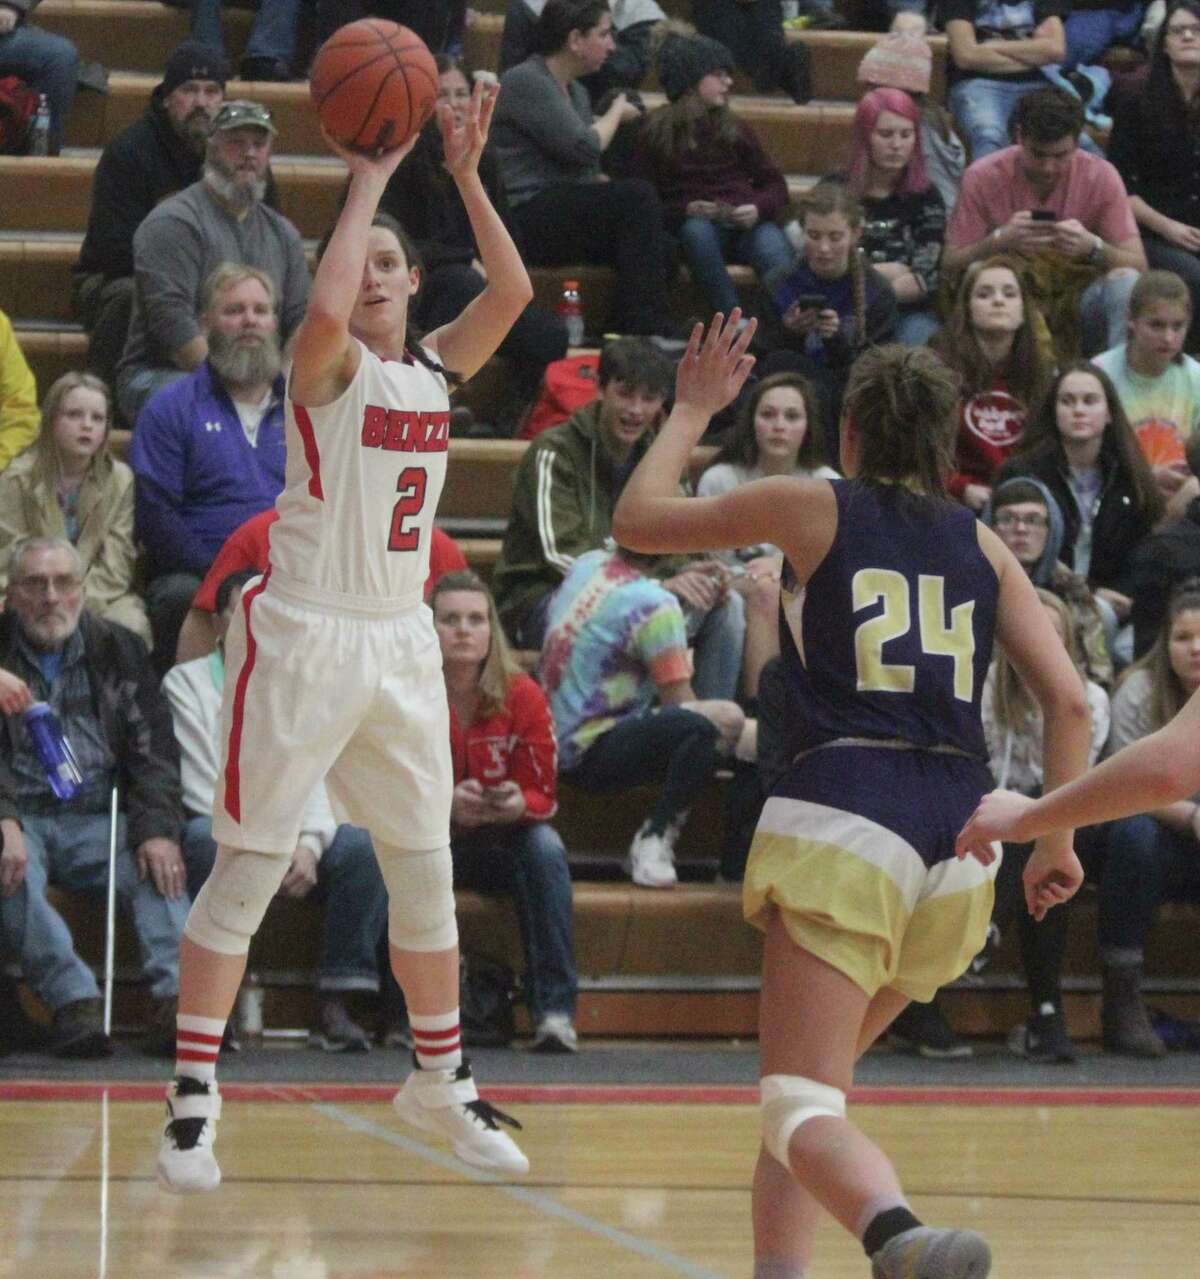 Abby Bretzke shoots a three from the corner, as she leads her team to victory over Frankfort. (File photo)